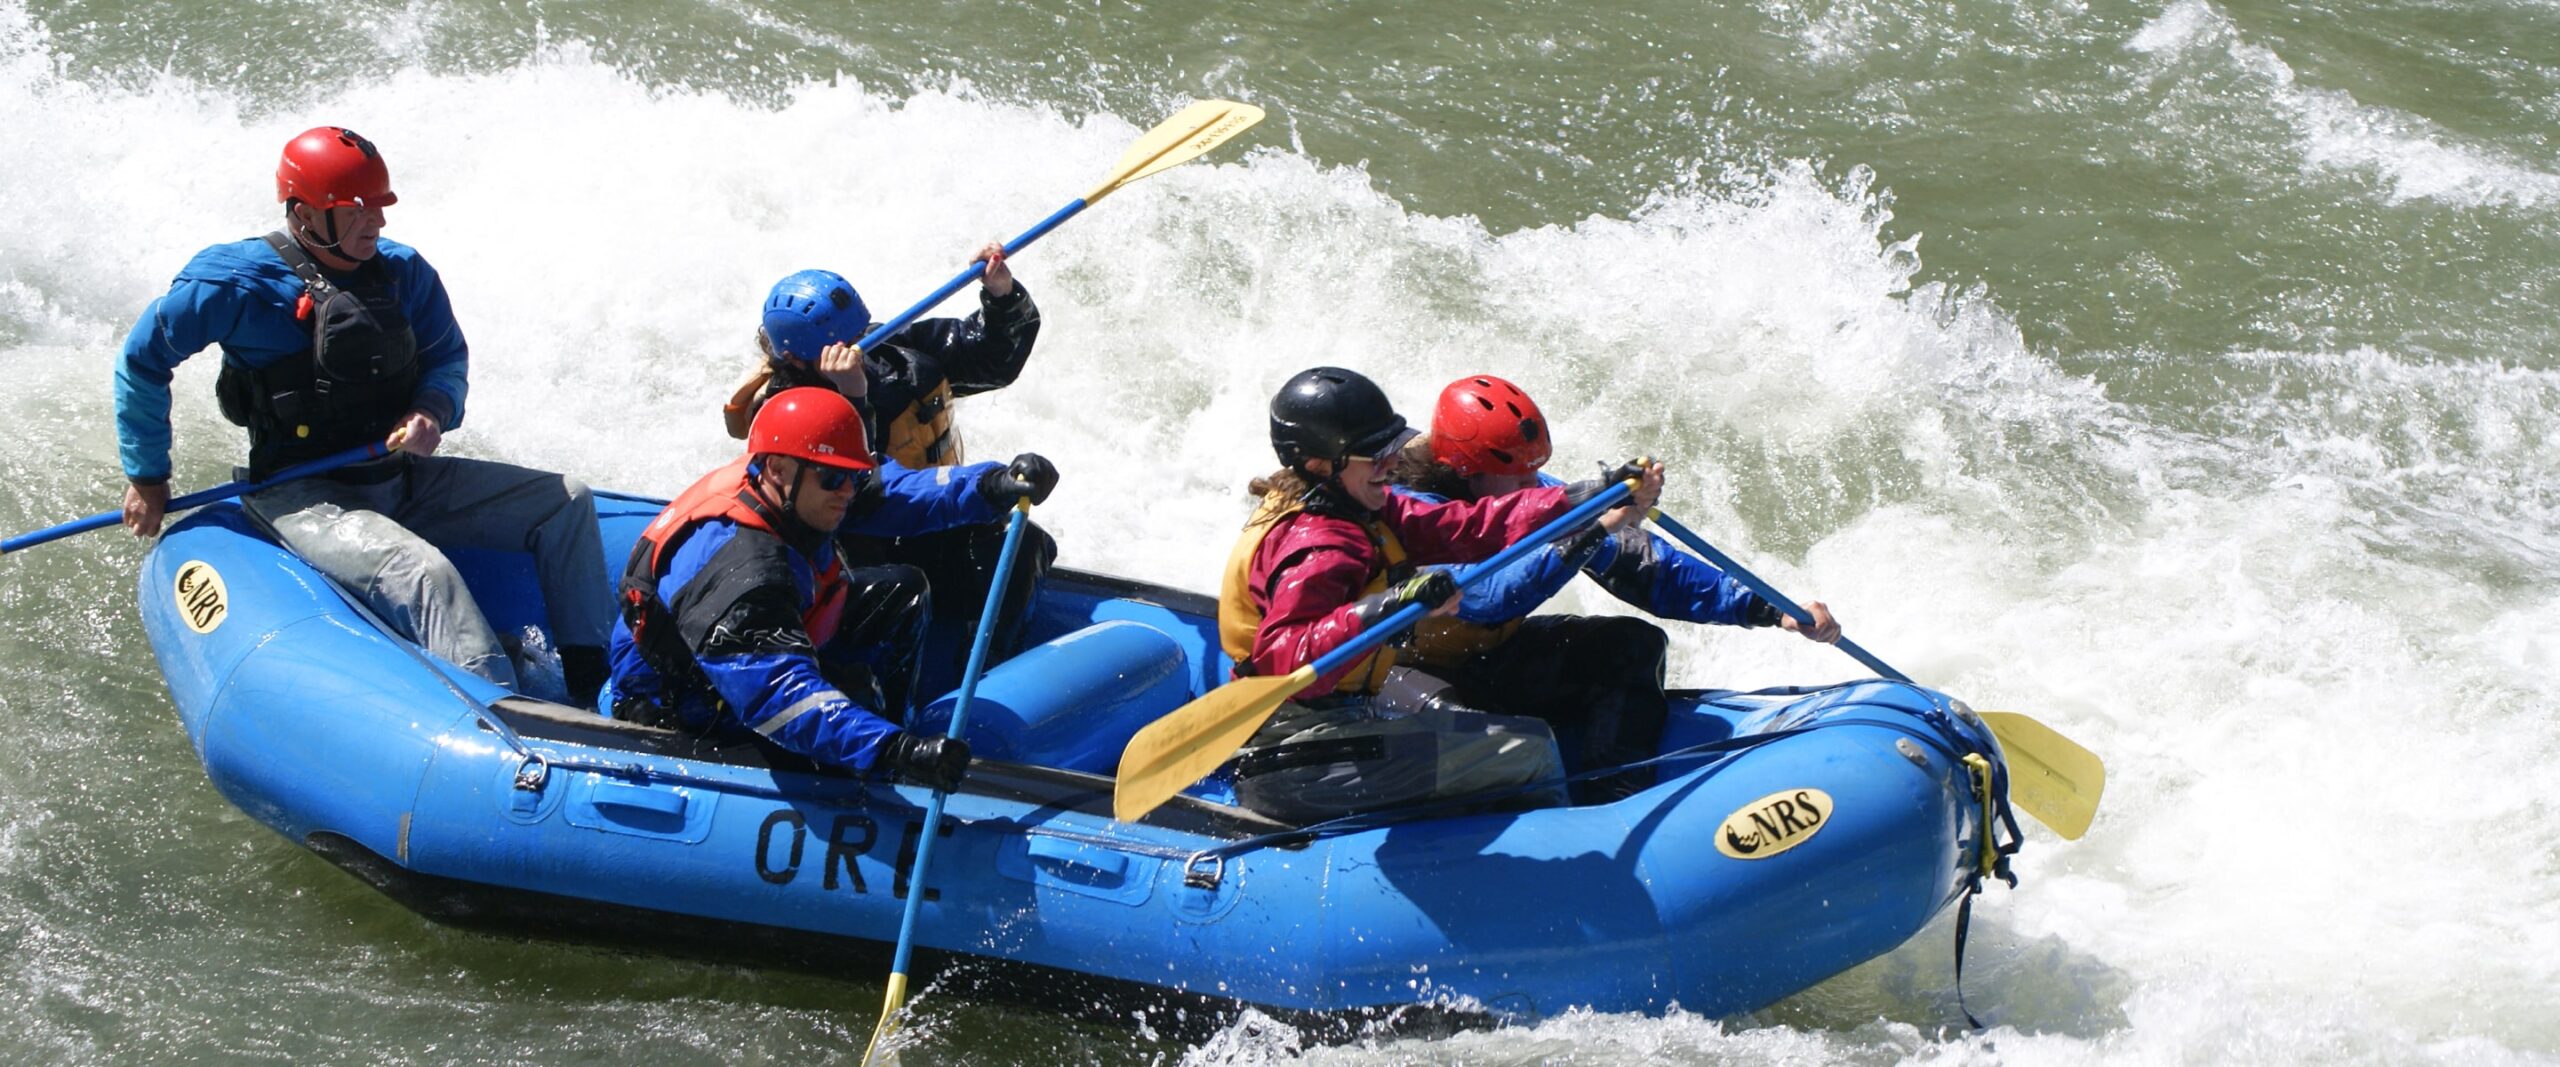 A group of guided white water rafters go through a rapid on the river in a blue raft.